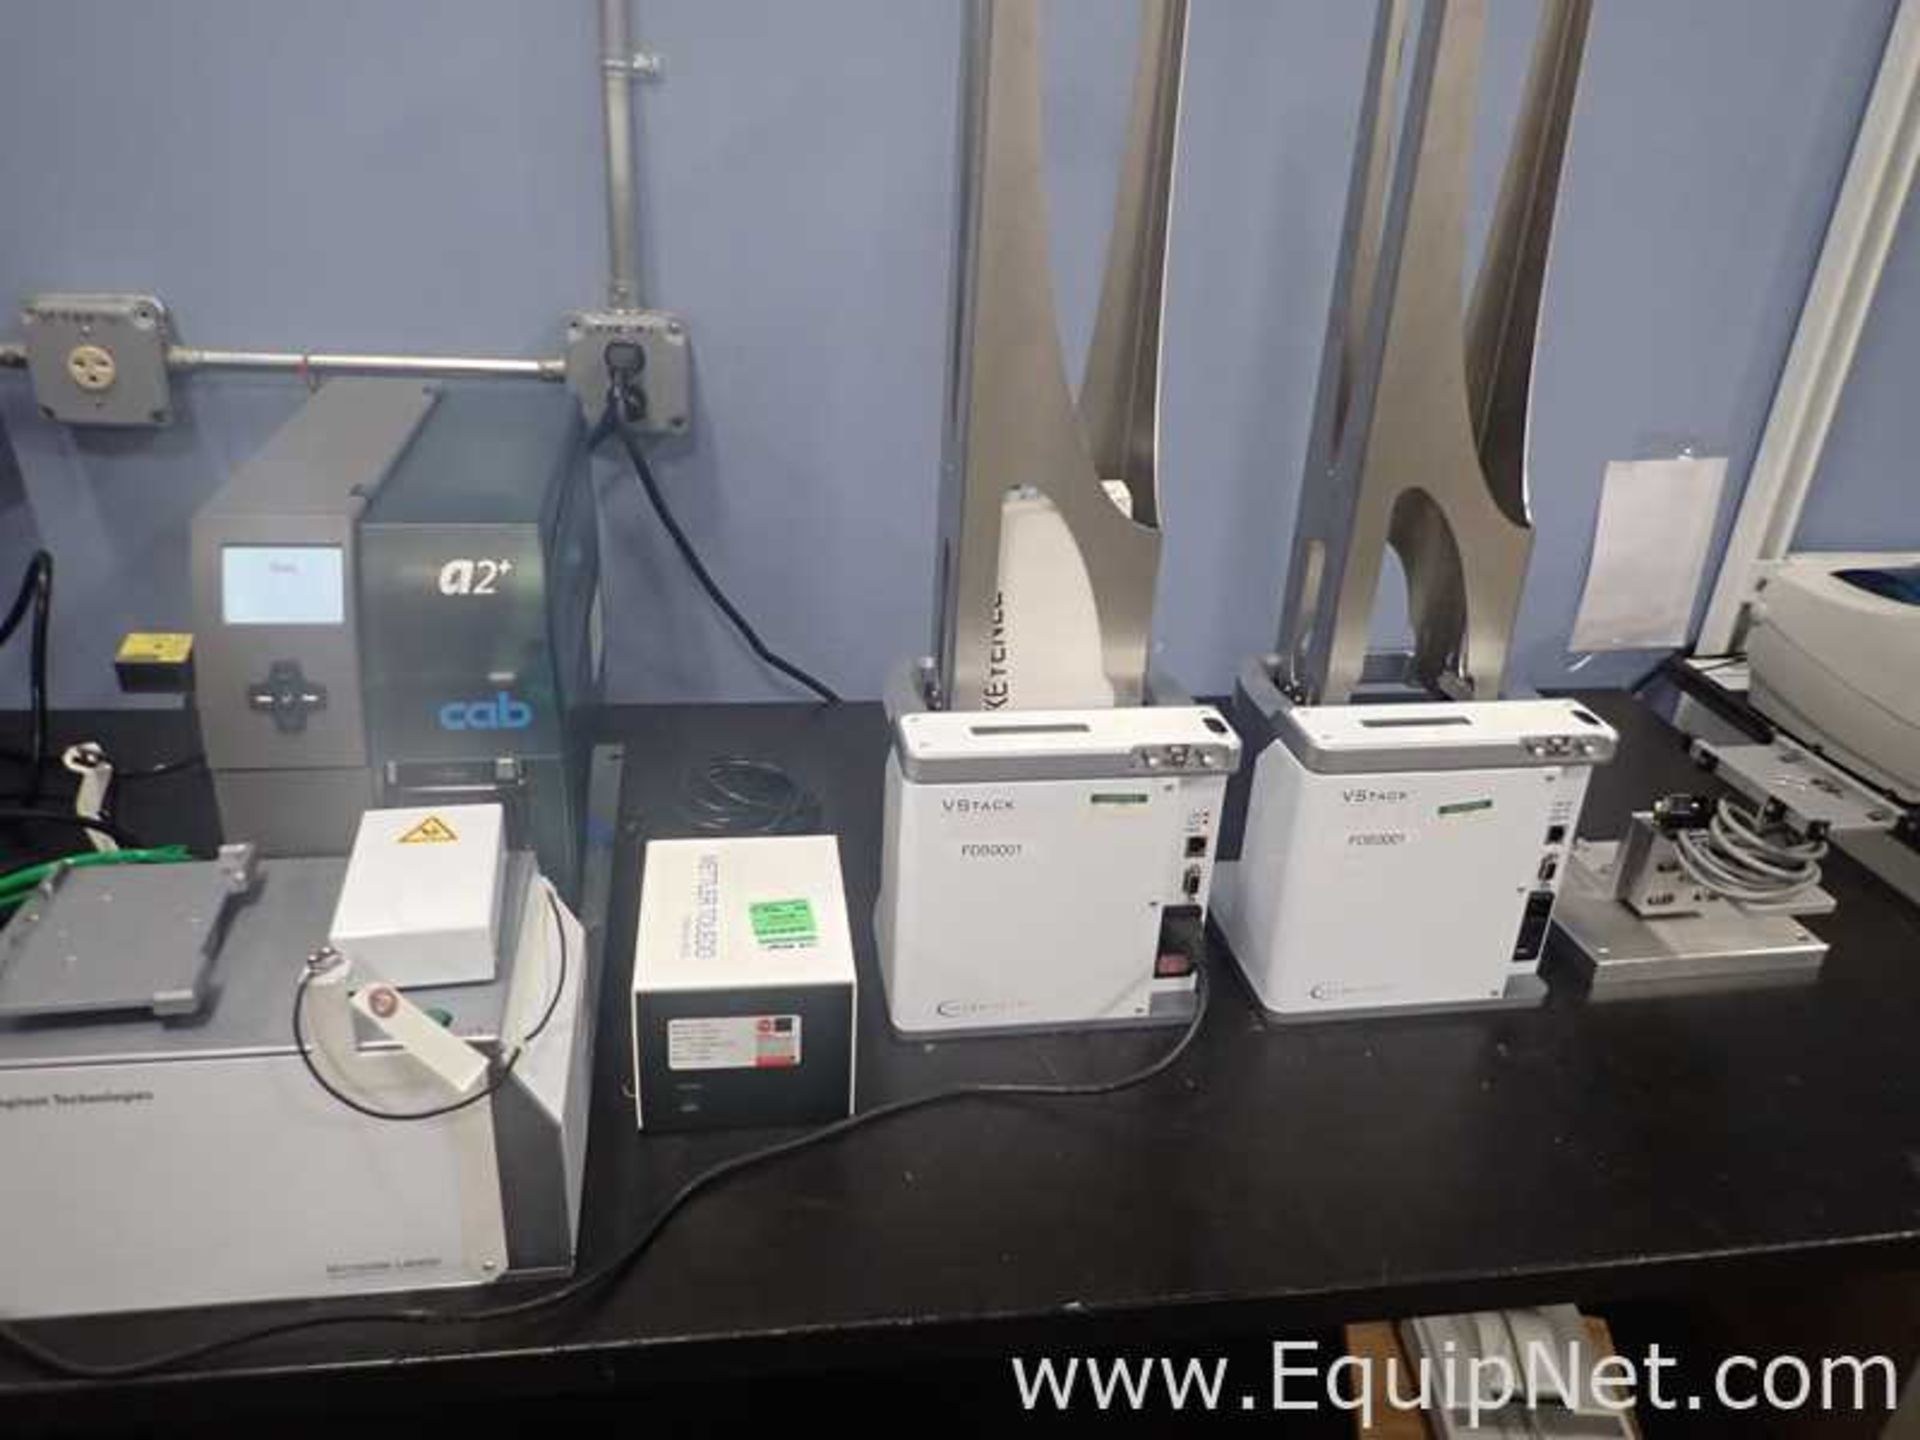 Agilent Technologies G5404 Microplate Labeler with Velocity Stacker and a Cab A2Plus Labeler